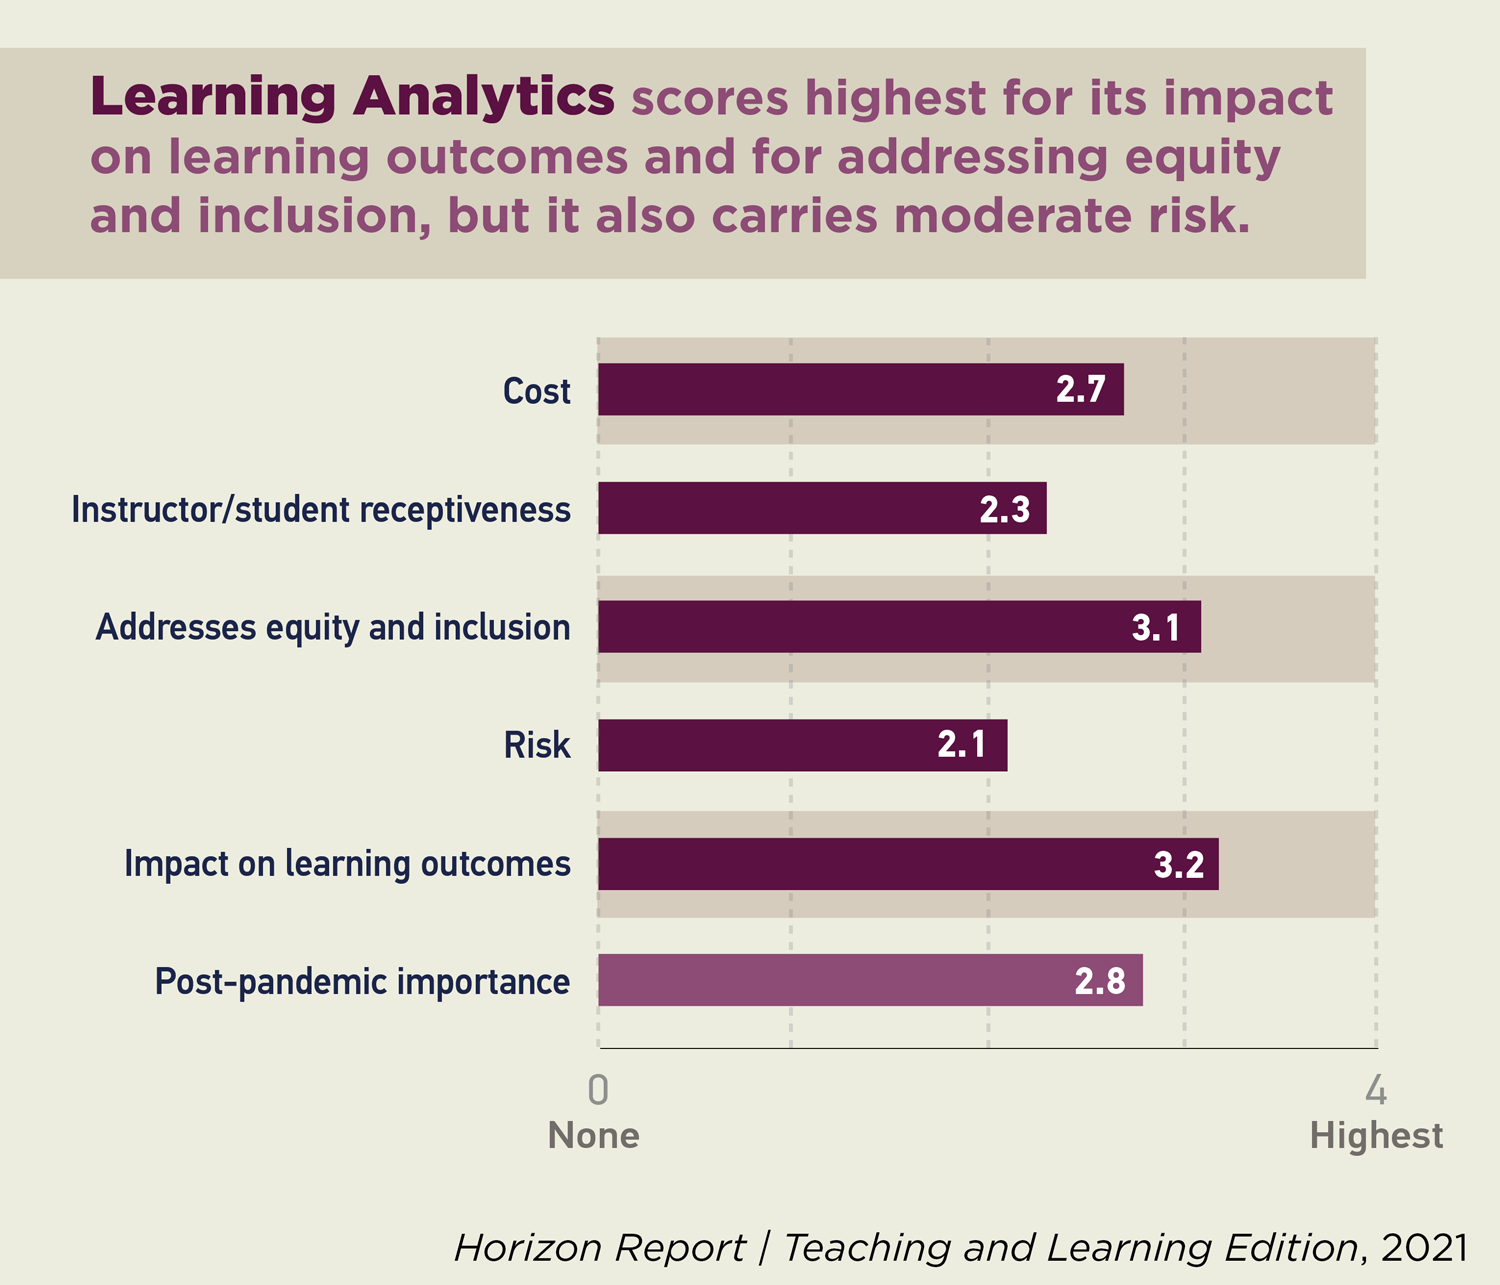 Learning Analytics scores highest for its impact on learning outcomes and for addressing equity and inclusion, but it also carries moderate risk.